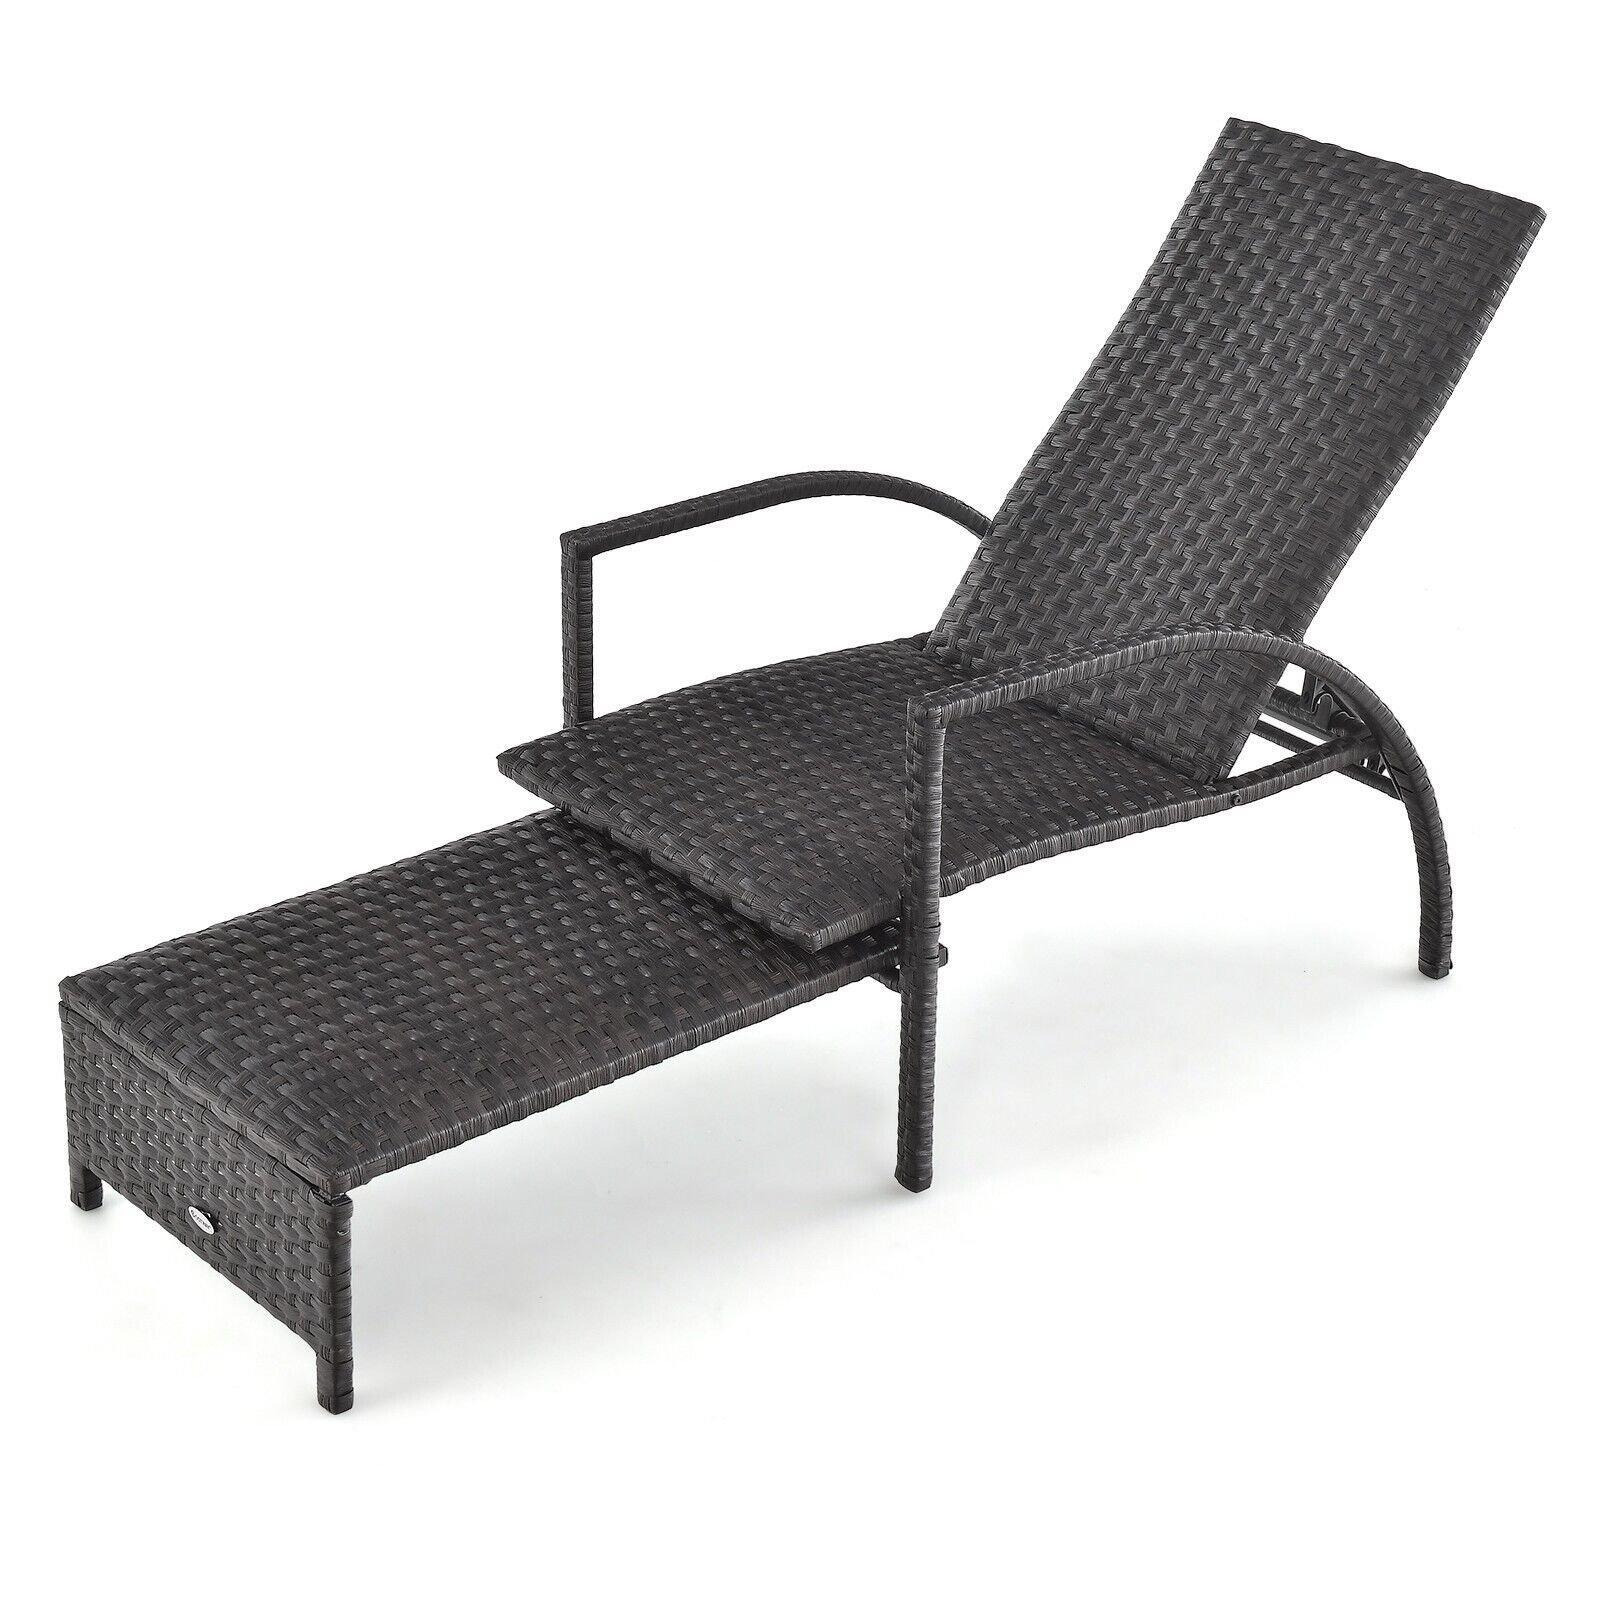 Outdoor Rattan Lounge Chair 5-Level Adjustable Chaise Lounger Wicker Recliner - image 1